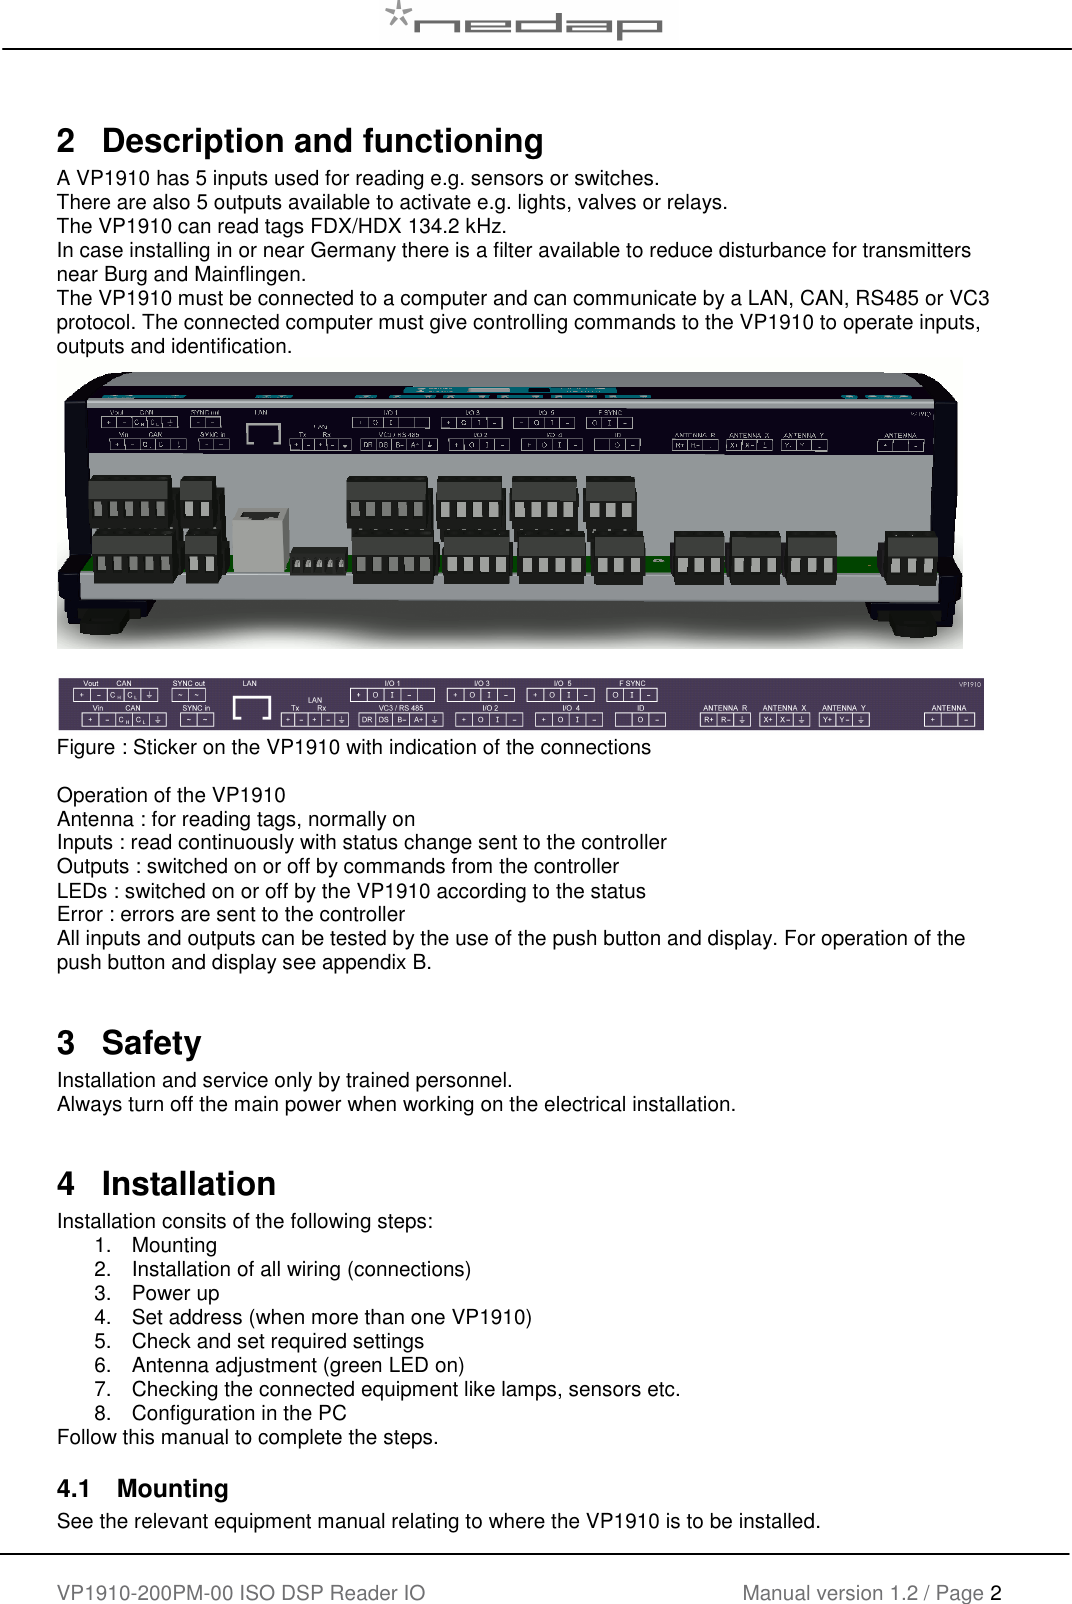    VP1910-200PM-00 ISO DSP Reader IO Manual version 1.2 / Page 2    2   Description and functioning A VP1910 has 5 inputs used for reading e.g. sensors or switches.   There are also 5 outputs available to activate e.g. lights, valves or relays. The VP1910 can read tags FDX/HDX 134.2 kHz. In case installing in or near Germany there is a filter available to reduce disturbance for transmitters near Burg and Mainflingen. The VP1910 must be connected to a computer and can communicate by a LAN, CAN, RS485 or VC3  protocol. The connected computer must give controlling commands to the VP1910 to operate inputs, outputs and identification.     Figure : Sticker on the VP1910 with indication of the connections  Operation of the VP1910 Antenna : for reading tags, normally on Inputs : read continuously with status change sent to the controller Outputs : switched on or off by commands from the controller LEDs : switched on or off by the VP1910 according to the status Error : errors are sent to the controller All inputs and outputs can be tested by the use of the push button and display. For operation of the push button and display see appendix B.  3   Safety Installation and service only by trained personnel. Always turn off the main power when working on the electrical installation.  4  Installation Installation consits of the following steps: 1.  Mounting 2.  Installation of all wiring (connections) 3.  Power up 4.  Set address (when more than one VP1910) 5.  Check and set required settings 6.  Antenna adjustment (green LED on) 7.  Checking the connected equipment like lamps, sensors etc. 8.  Configuration in the PC Follow this manual to complete the steps. 4.1  Mounting See the relevant equipment manual relating to where the VP1910 is to be installed.  